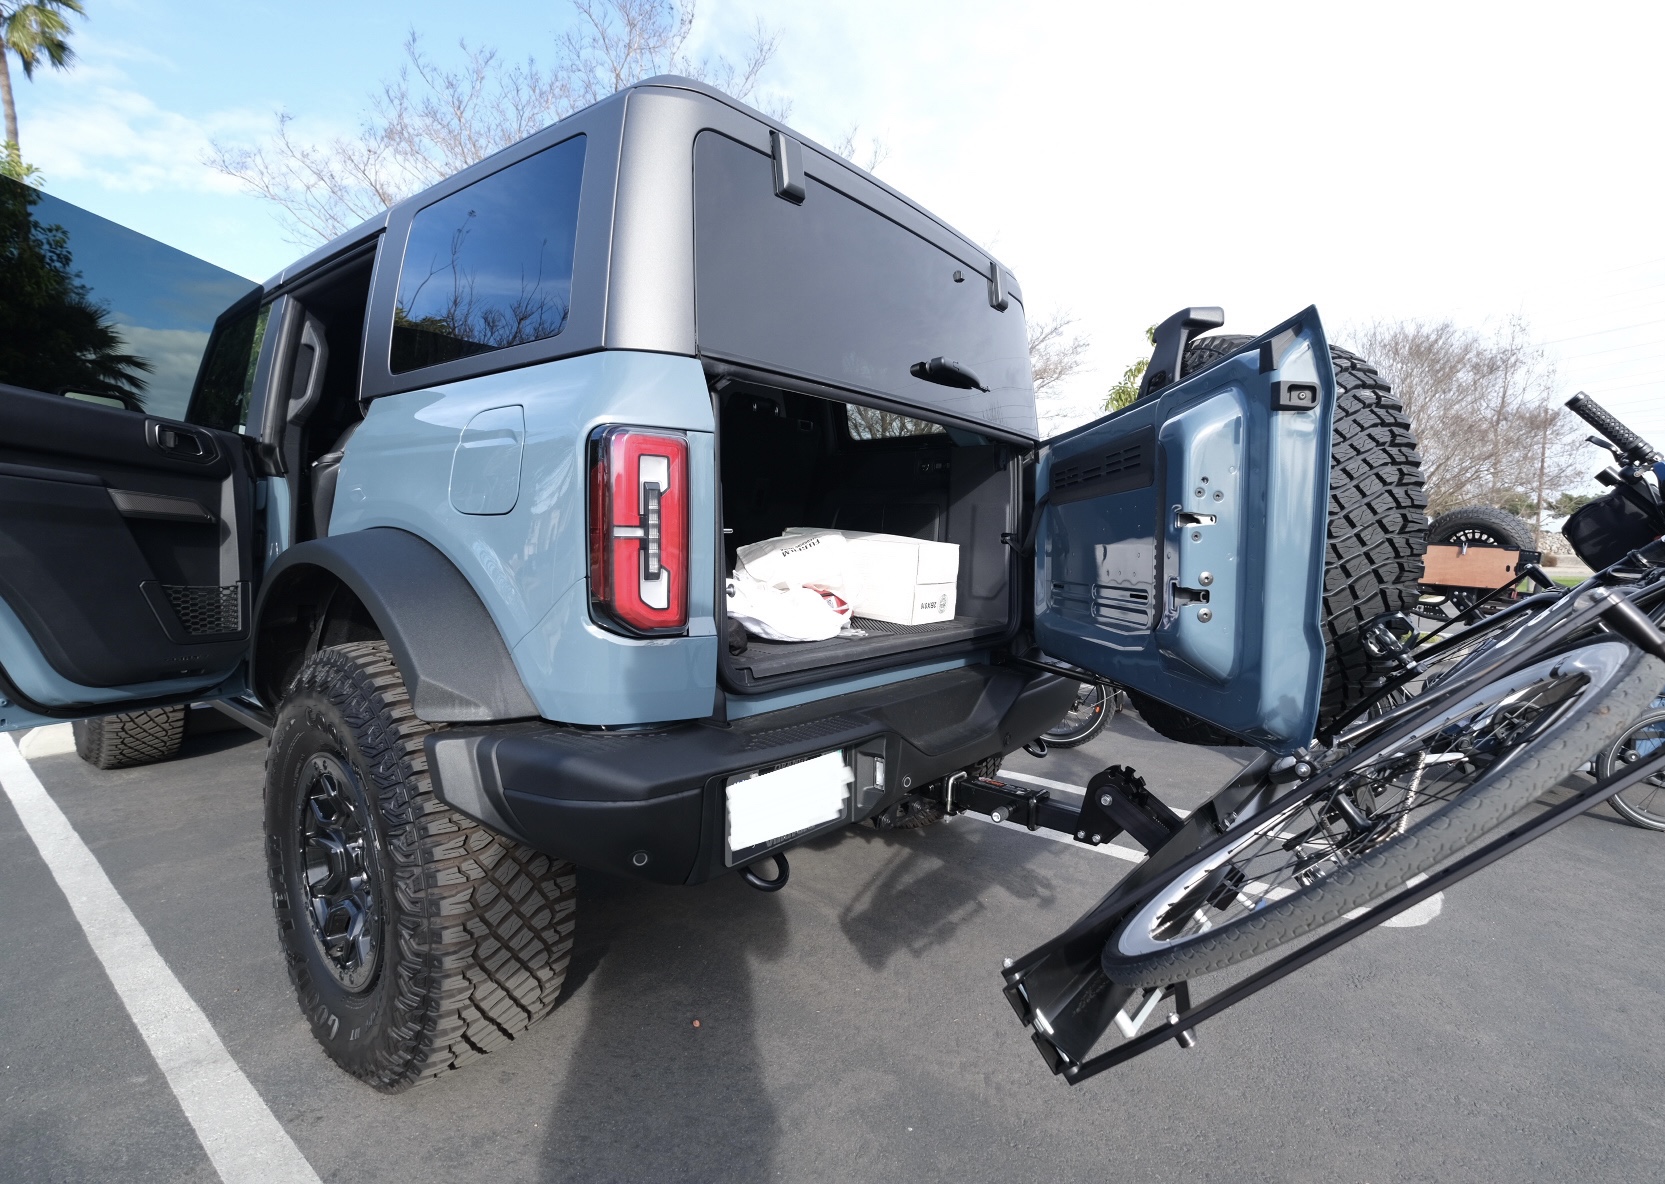 Ford Bronco Hitch Mount Bike Rack Options - Post your pics D9573AB6-813C-45FC-8EED-CB1E5277ACD0